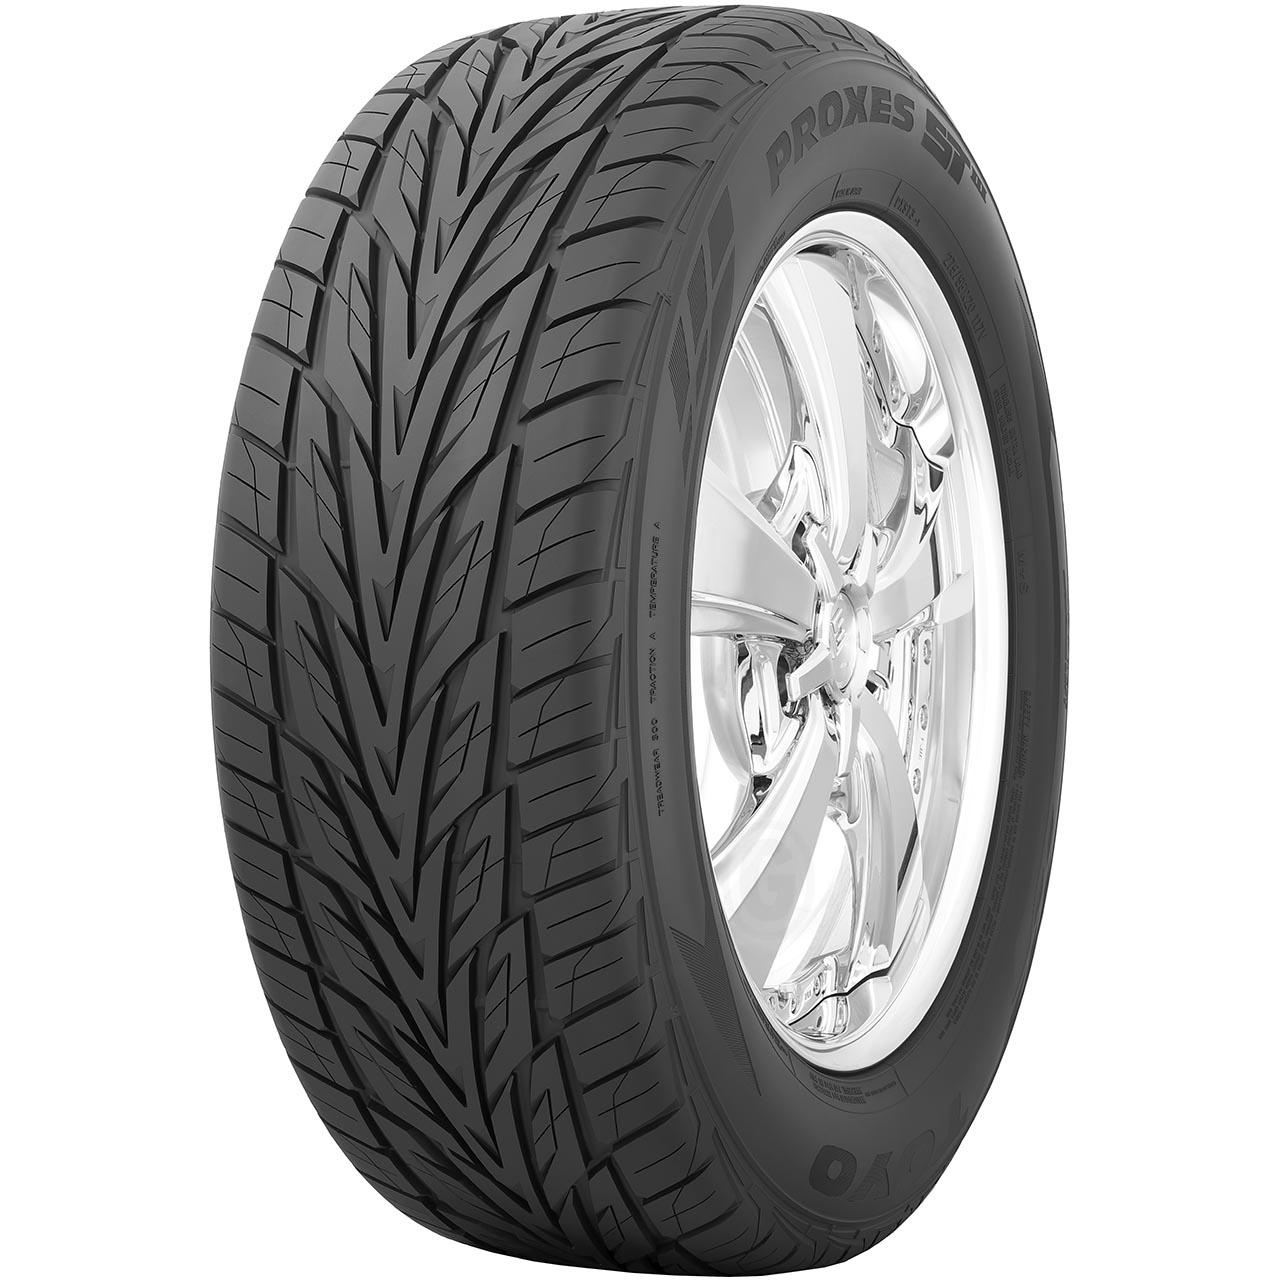 TOYO PROXES S/T III 255/60R18 112V